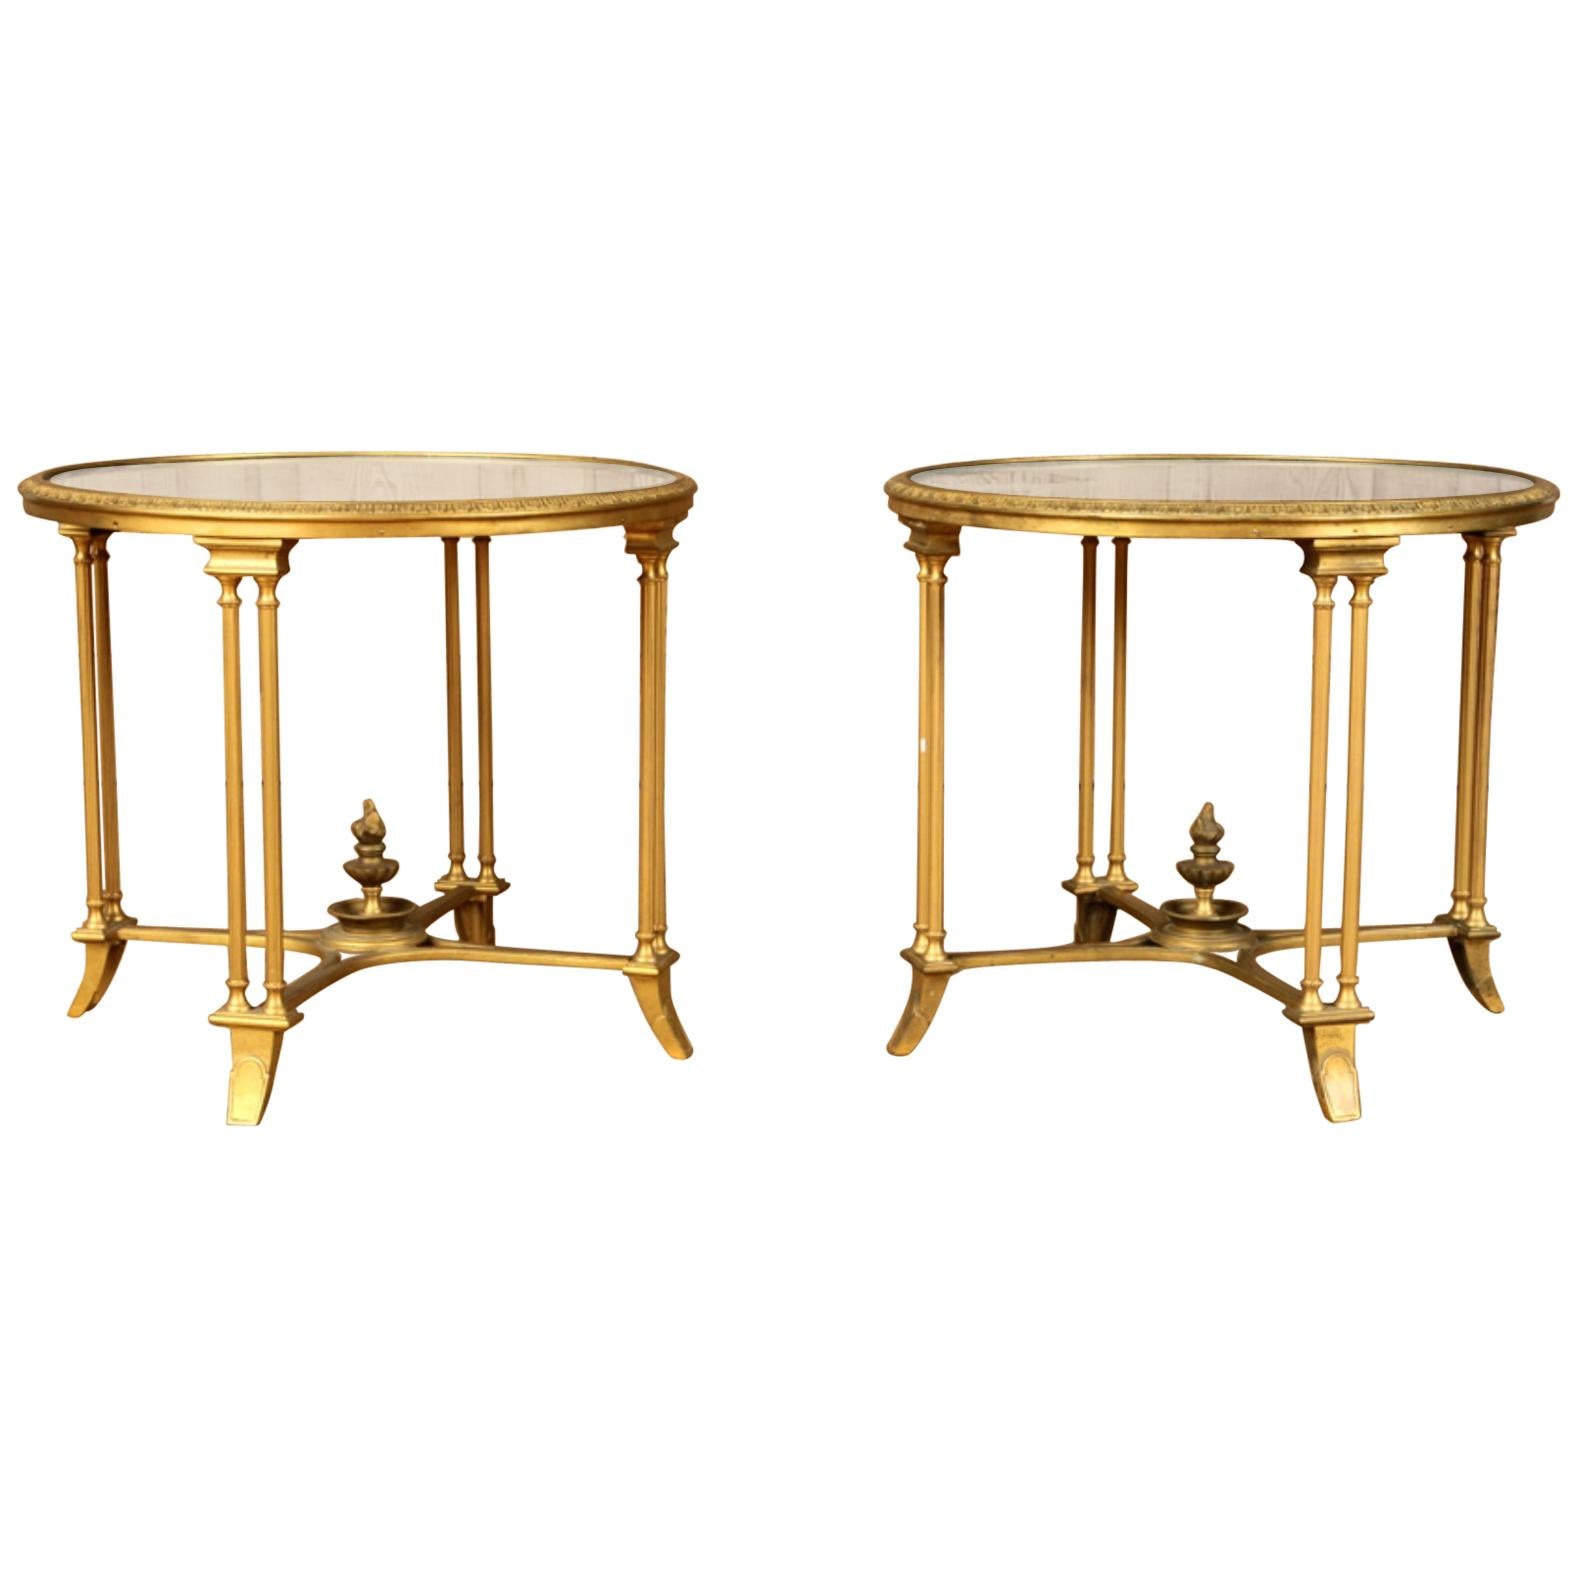 Pair of Bagues Style Gilt Bronze Neoclassical End Tables or Pedestals